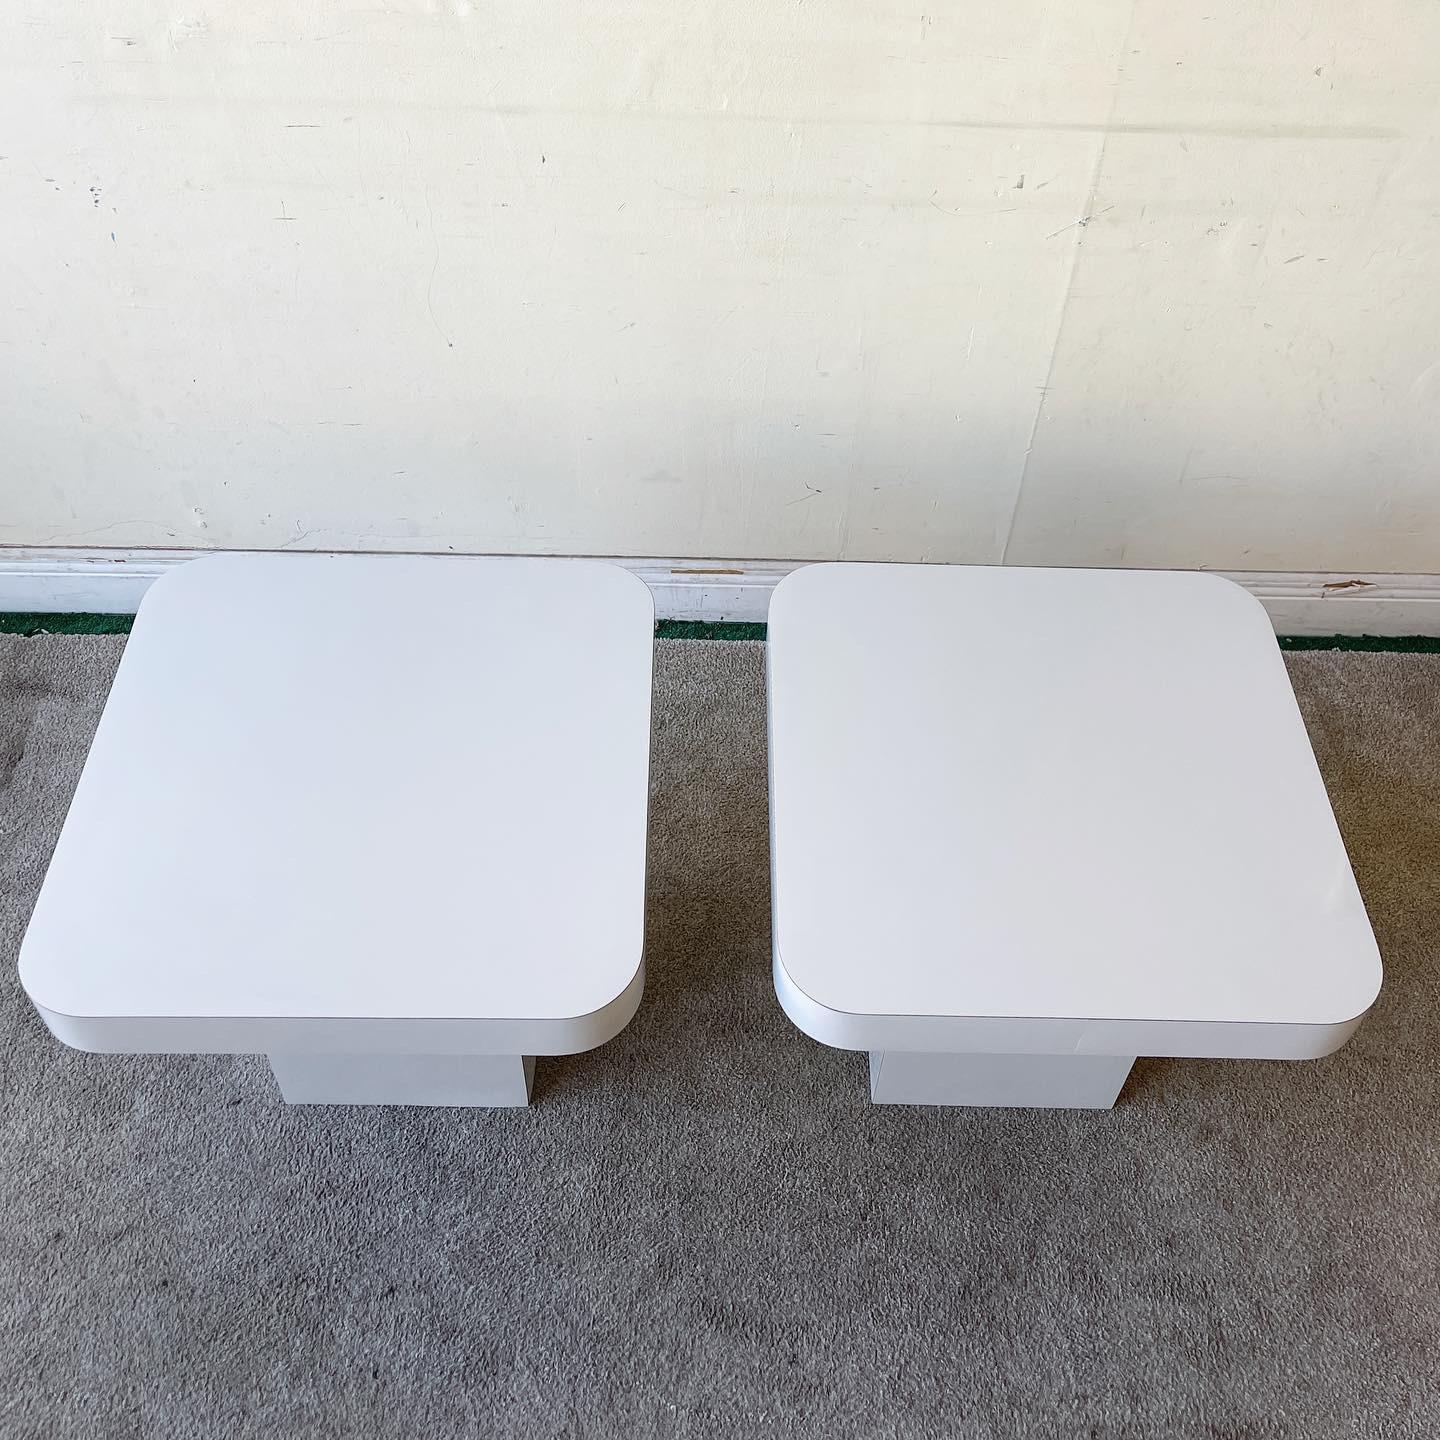 Amazing pair of postmodern mushroom side tables. Each feature a light gray lacquer laminate.

Additional information: 
Material: Laminate, Wood
Color: Gray
Style: Postmodern
Time Period: 1980s
Place of origin: USA
Dimension: 23